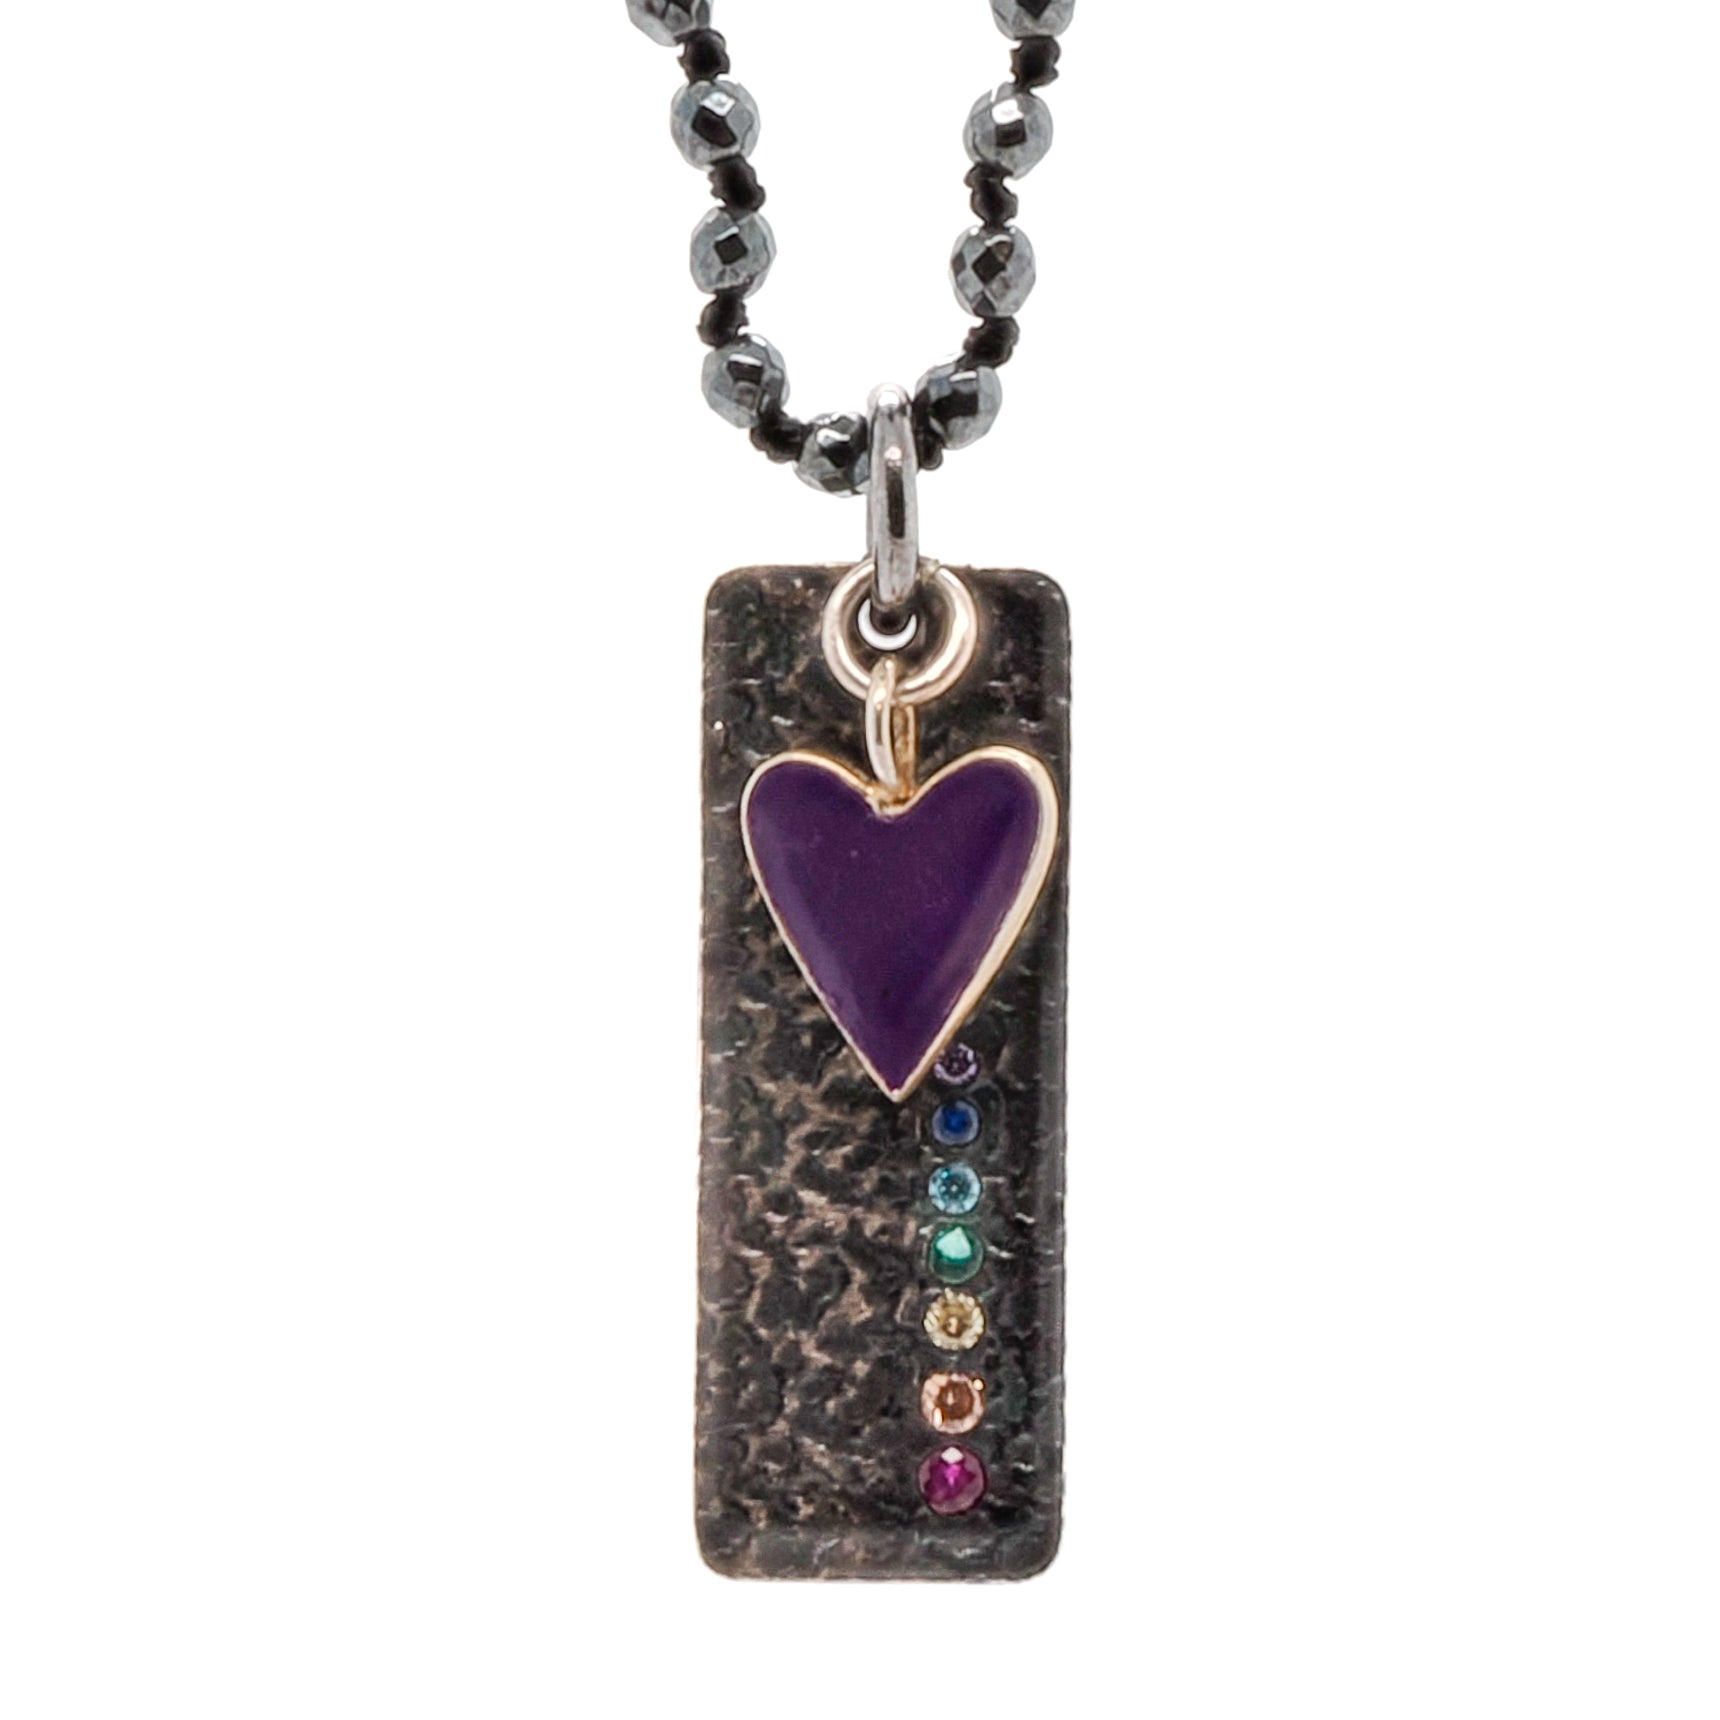 The Chakra Balance Necklace, a beautiful reminder to nurture and balance your energy centers.